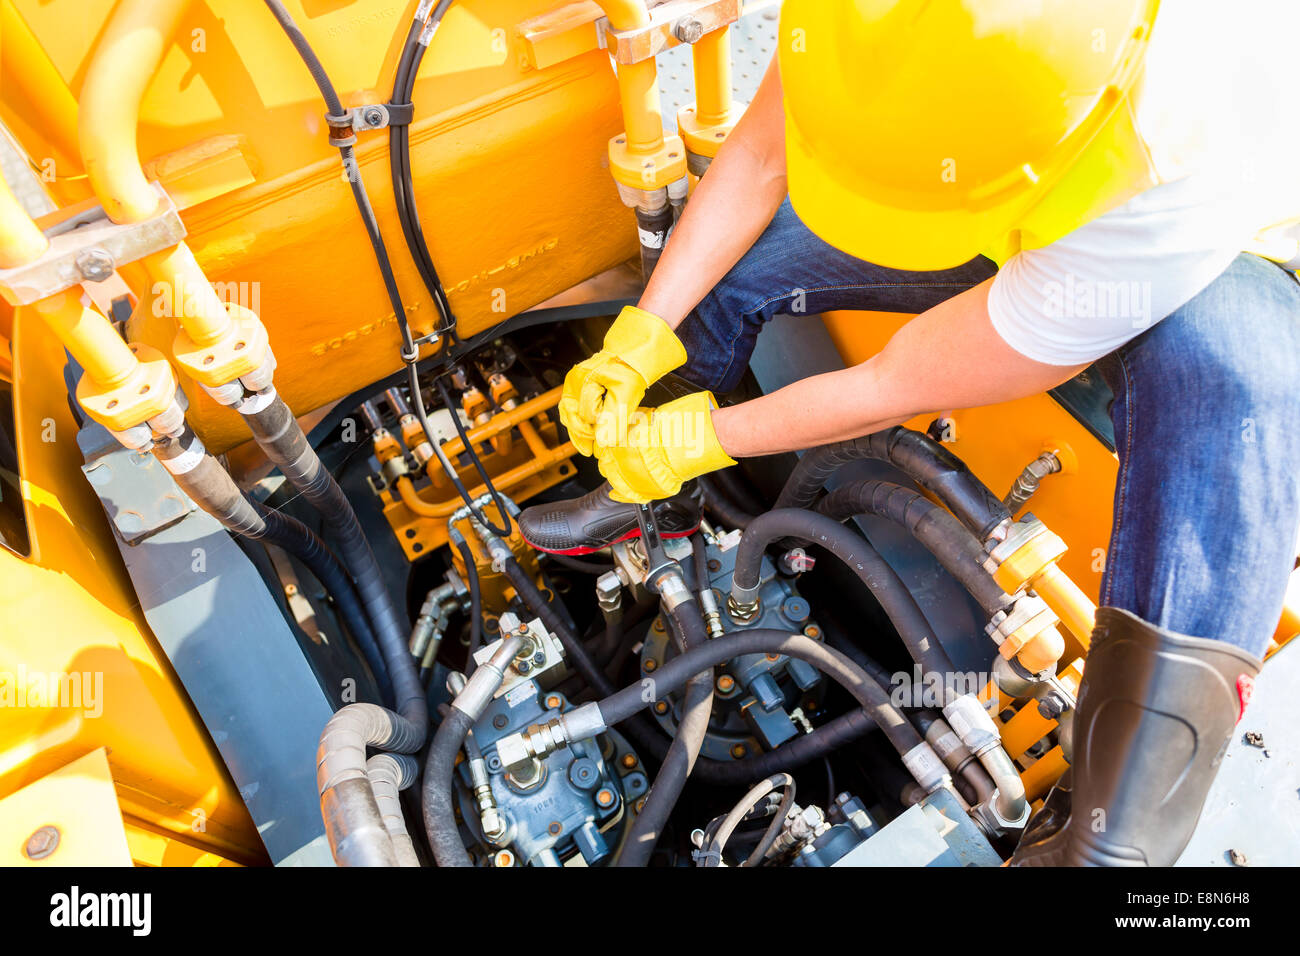 Asian motor mechanic working on construction or mining machinery in vehicle workshop Stock Photo